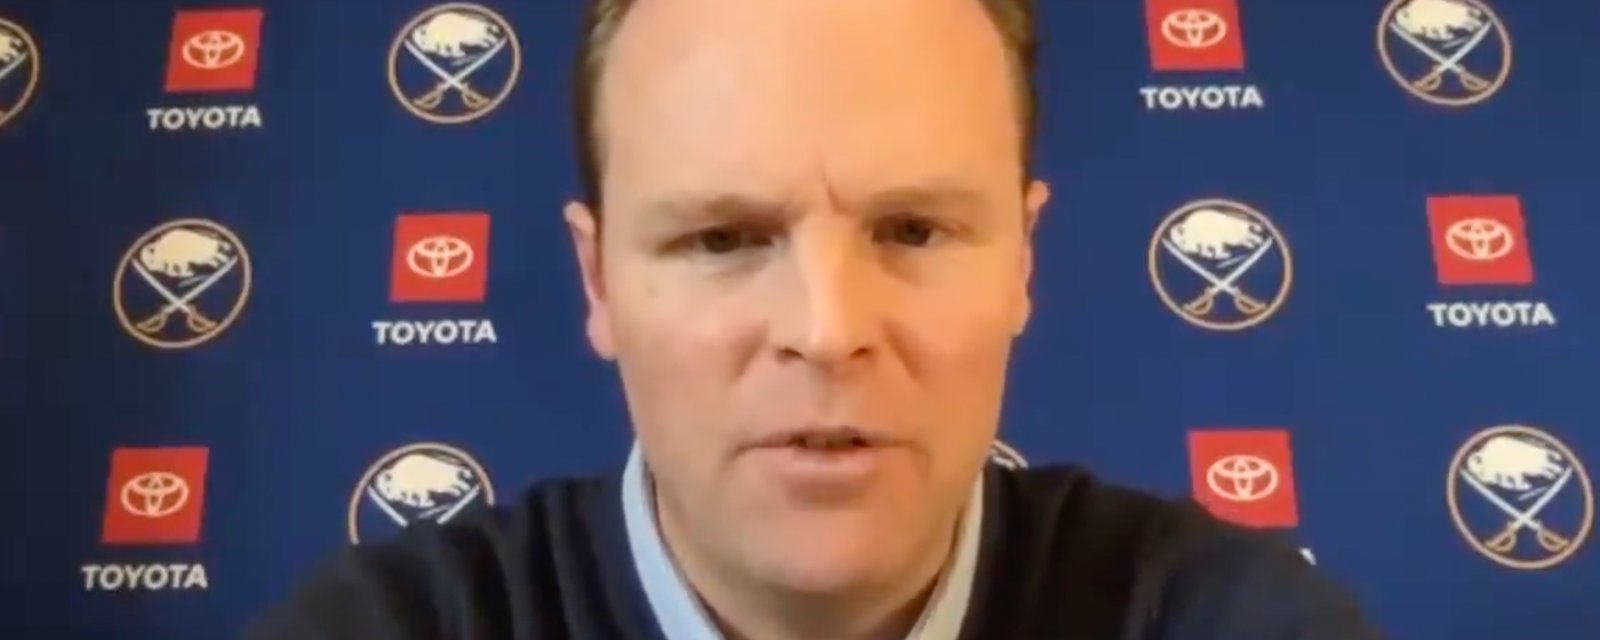 Sabres players and coach get ripped to shreds in live press conference